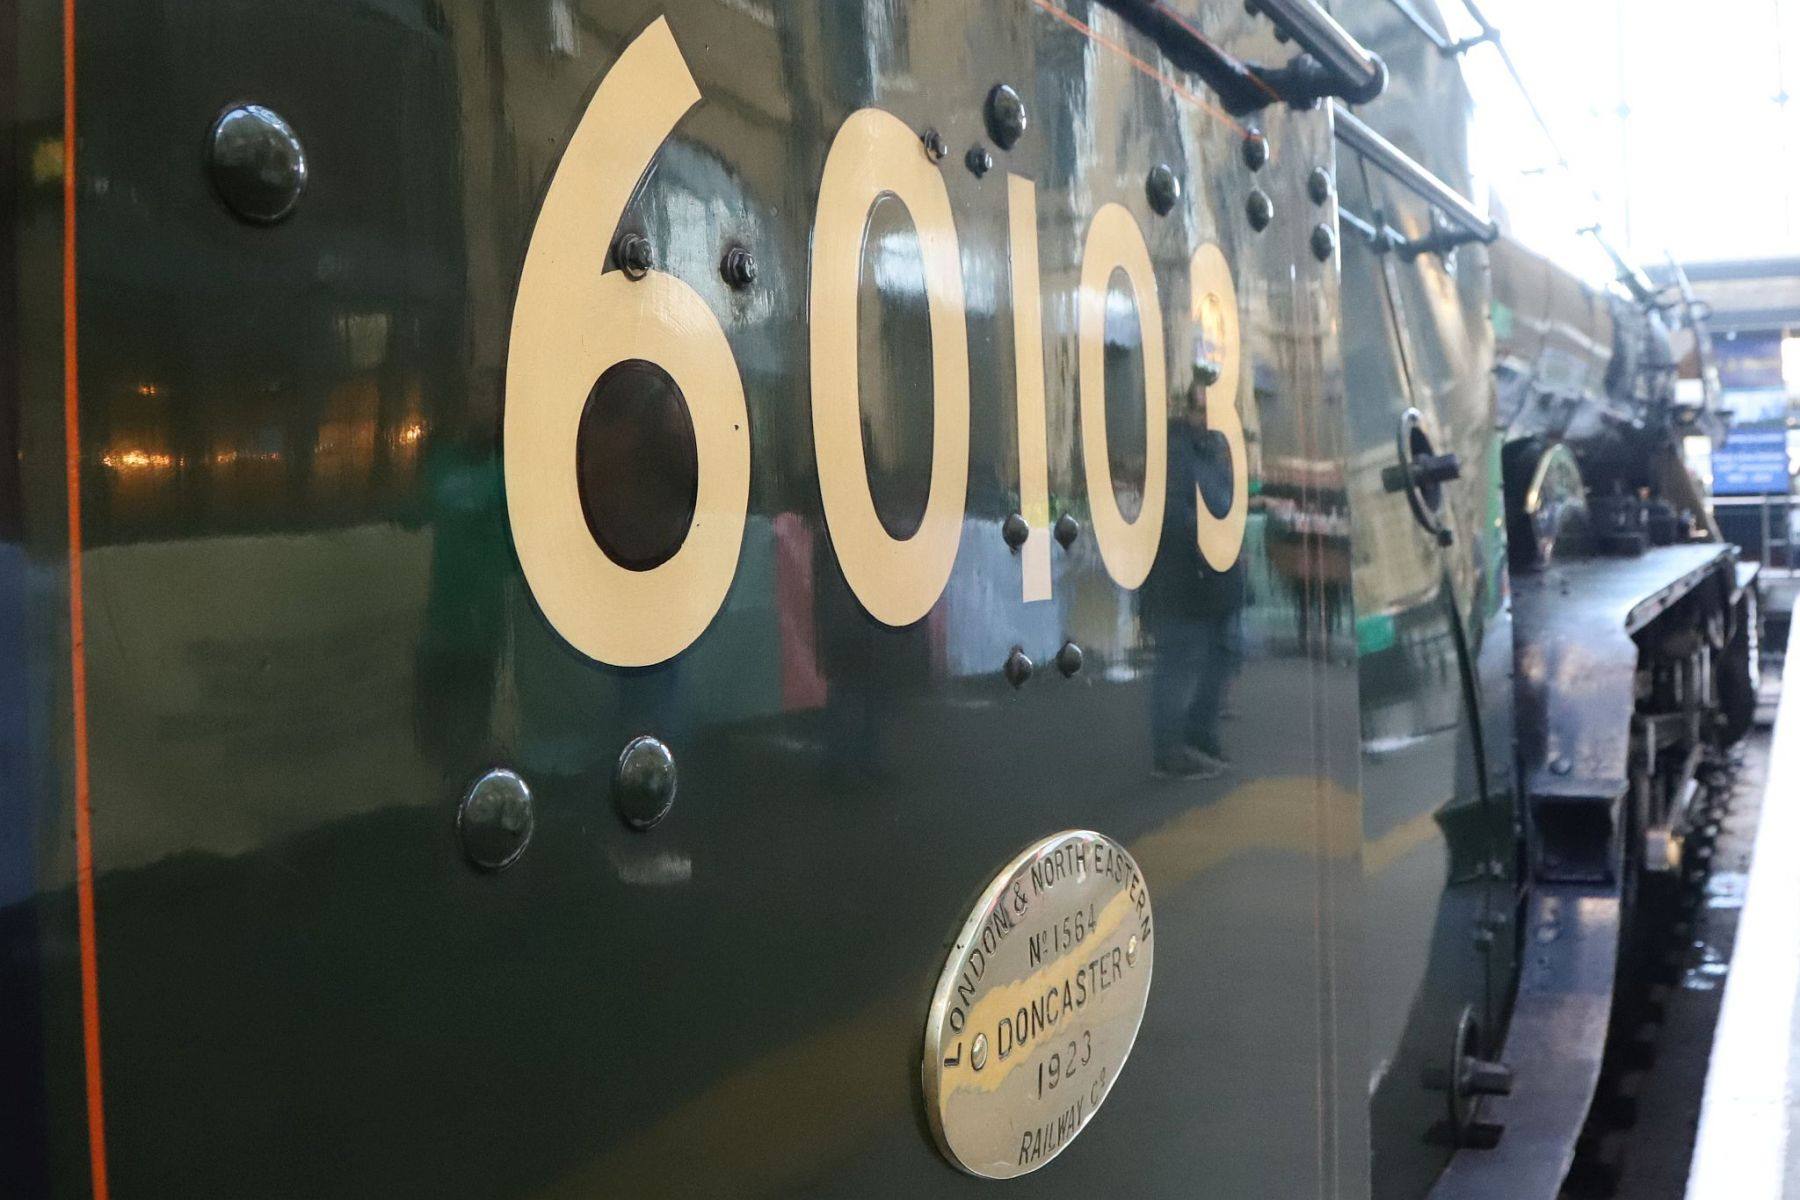 The British Railways locomotive number 60103 on Flying Scotsman's cab side . Flying Scotsman steam locomotive at King's Cross railway station platform 8 for the 170th anniversary of the station's opening and the start of Flying Scotsman's 100th birthday celebrations